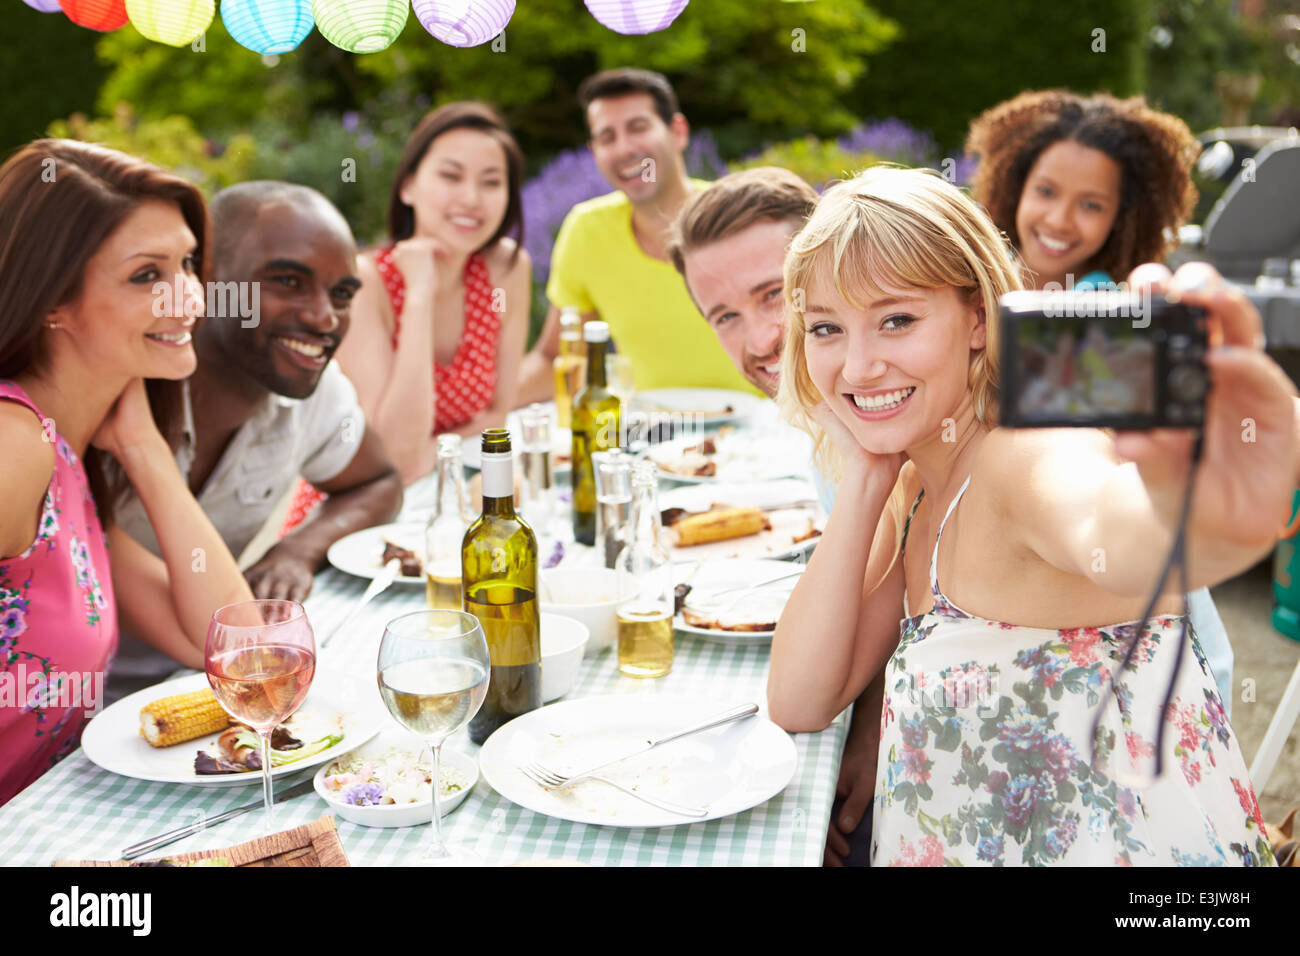 Friends Taking Self Portrait On Camera At Outdoor Barbeque Stock Photo